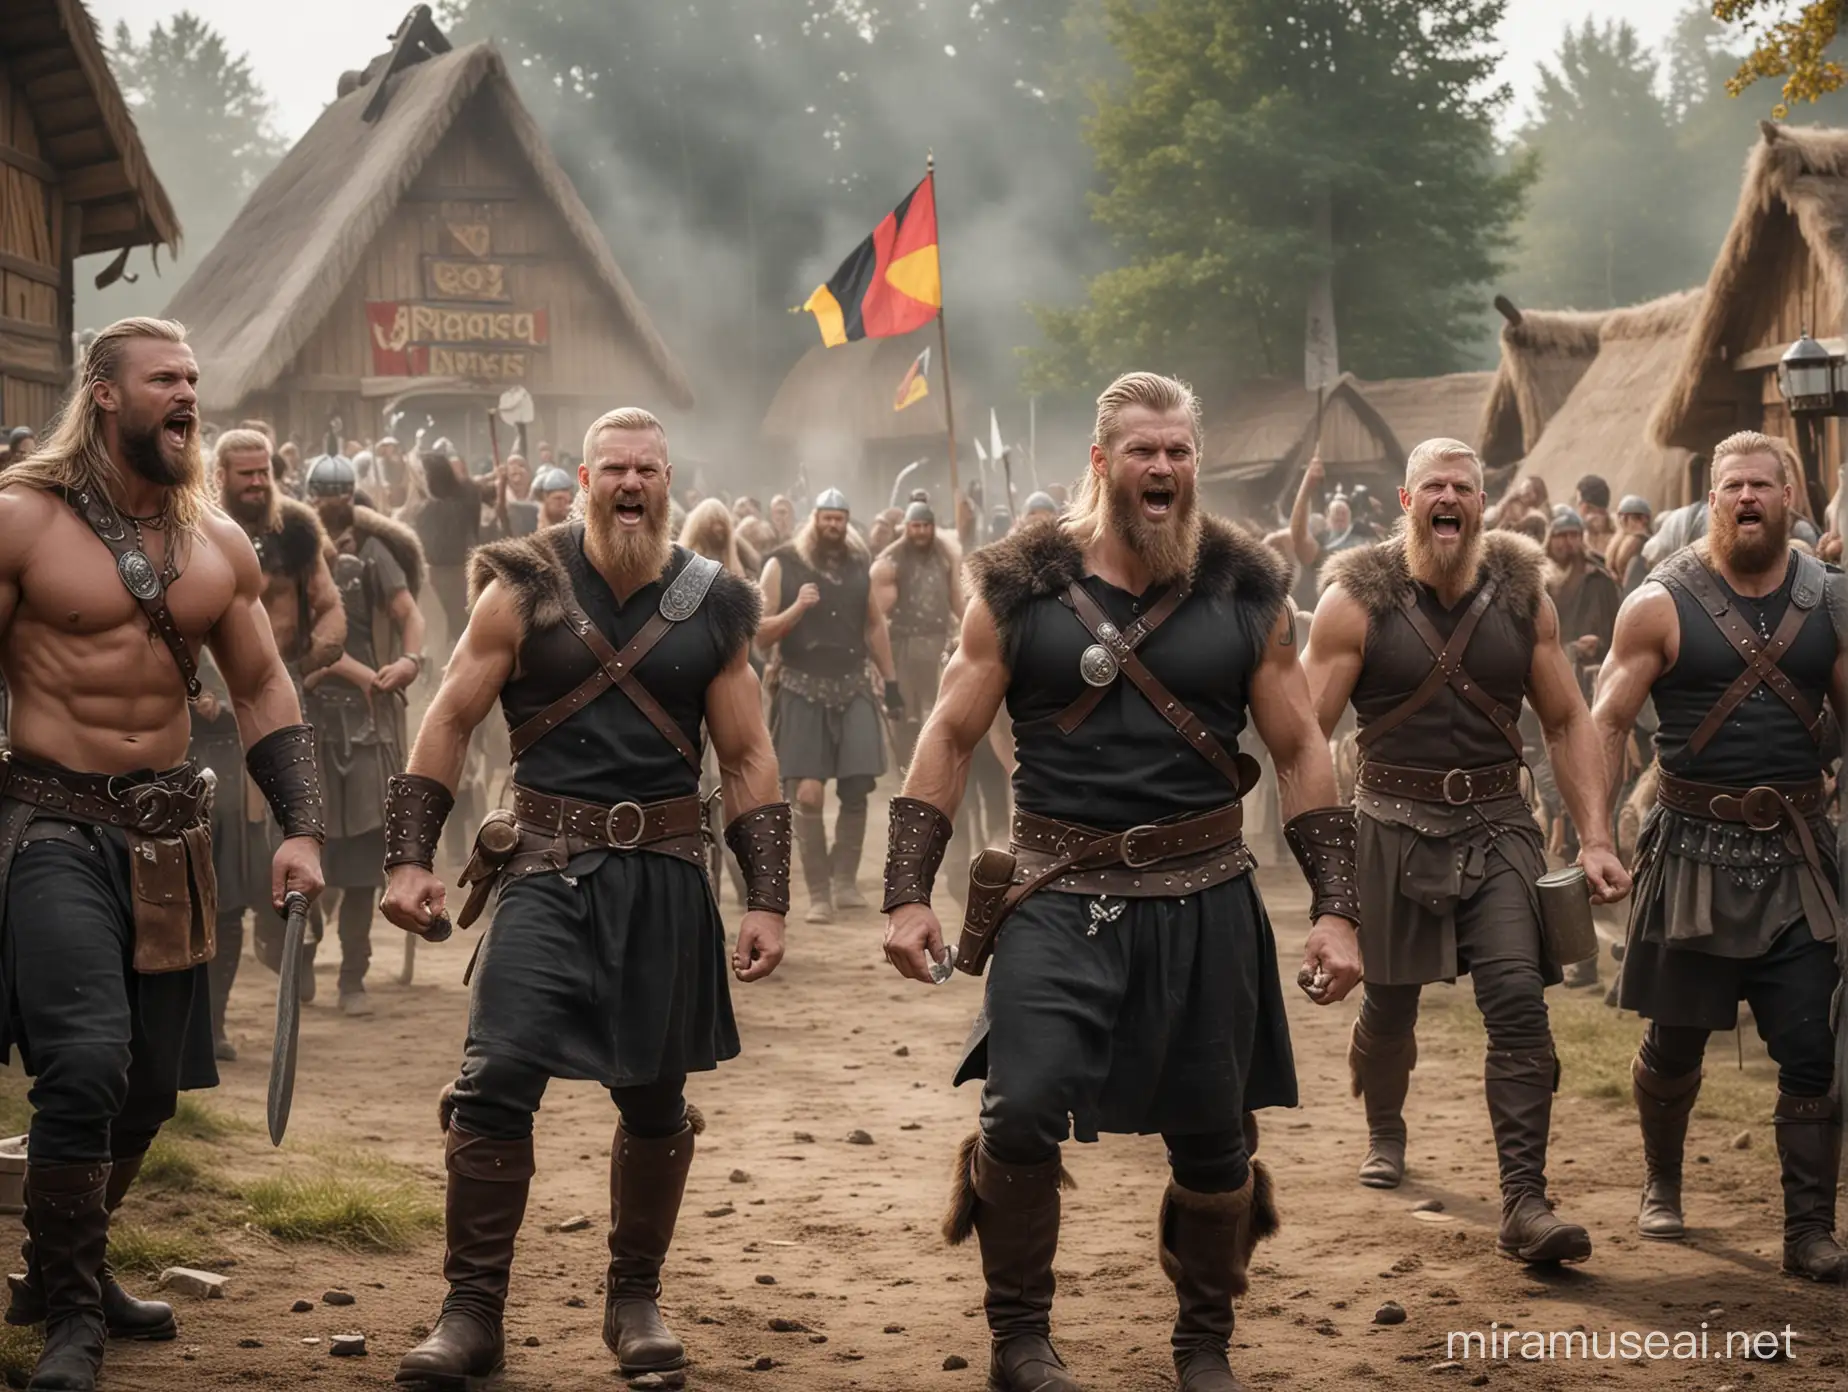 Muscular Vikings Roaring and Swinging Axes with German Flags in a Viking Village